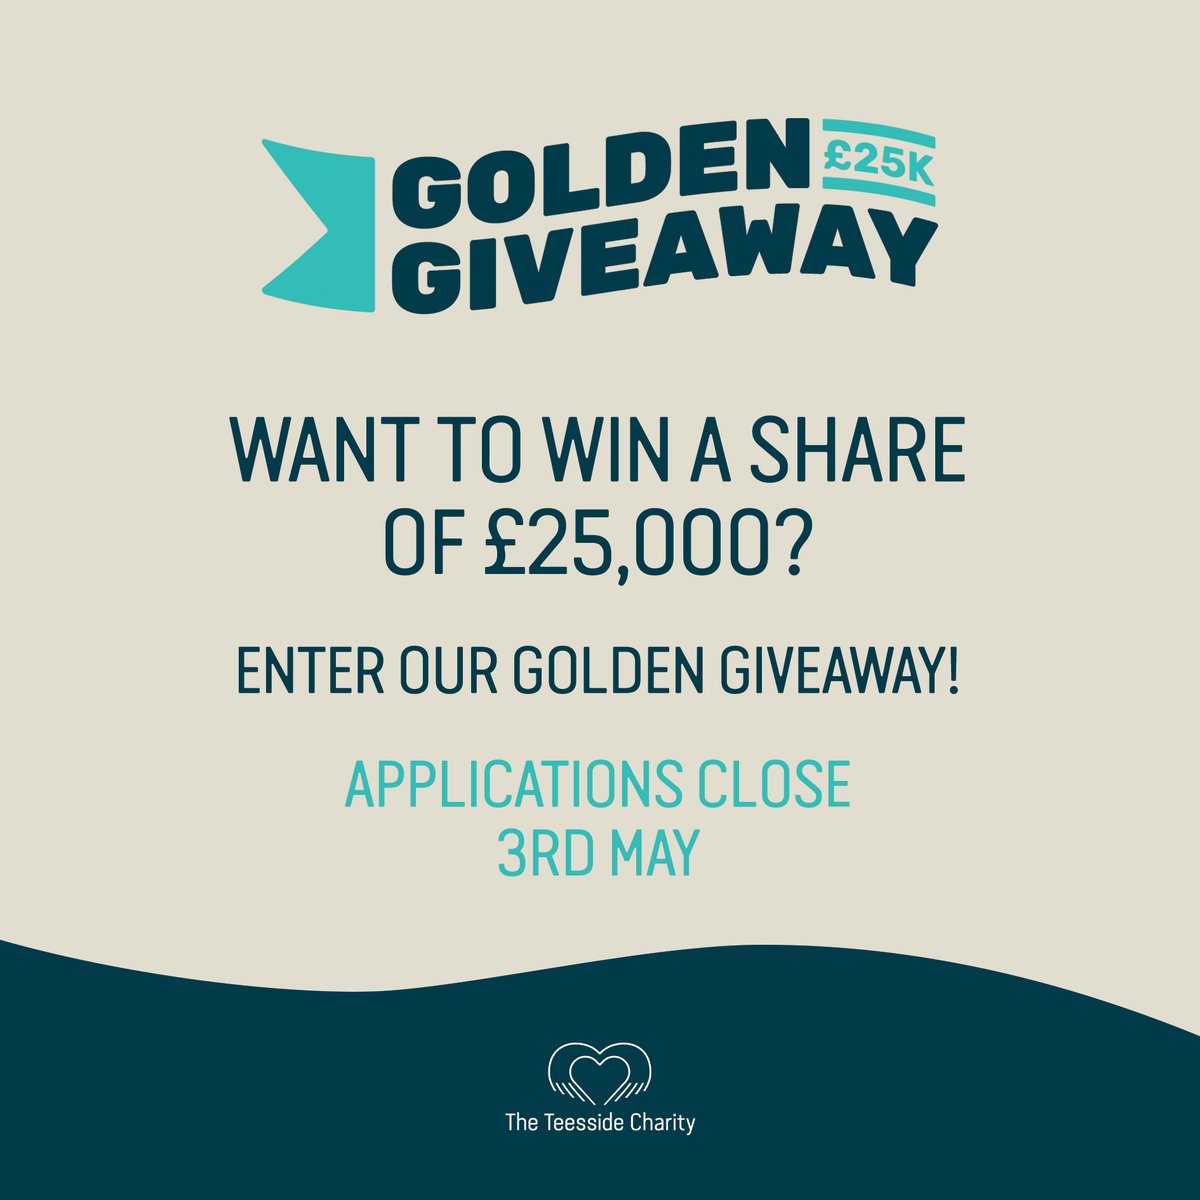 3 Weeks left to apply ❗ Want to win a share of £25,000? Enter our Golden Giveaway before 3rd May. Apply now 👉 lnkd.in/e79PABqr